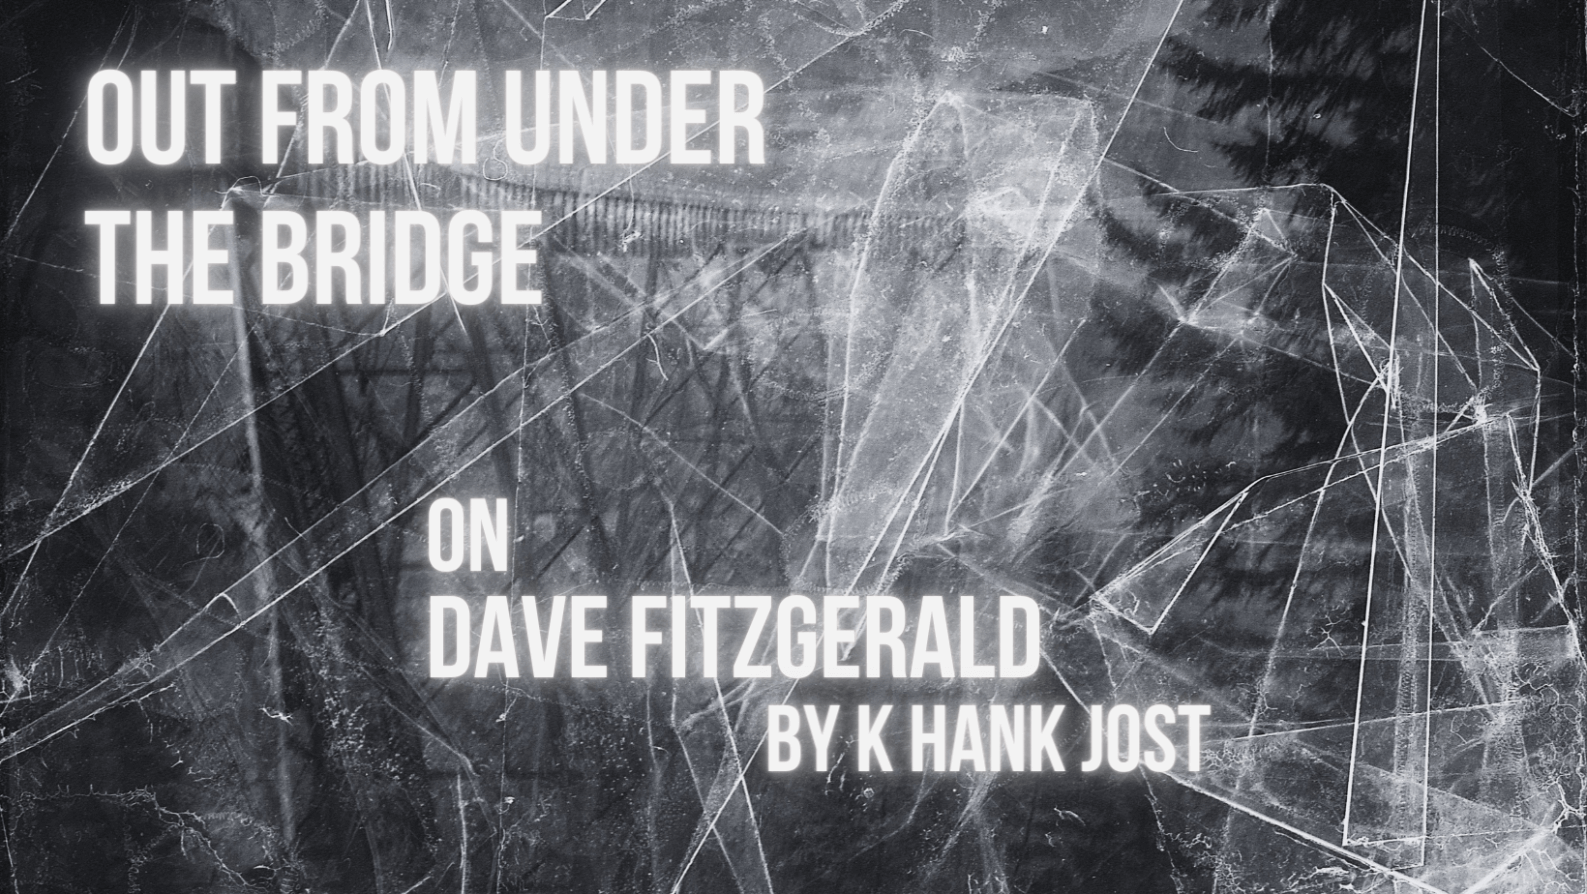 OUT FROM UNDER THE BRIDGE: ON DAVE FITZGERALD by K Hank Jost